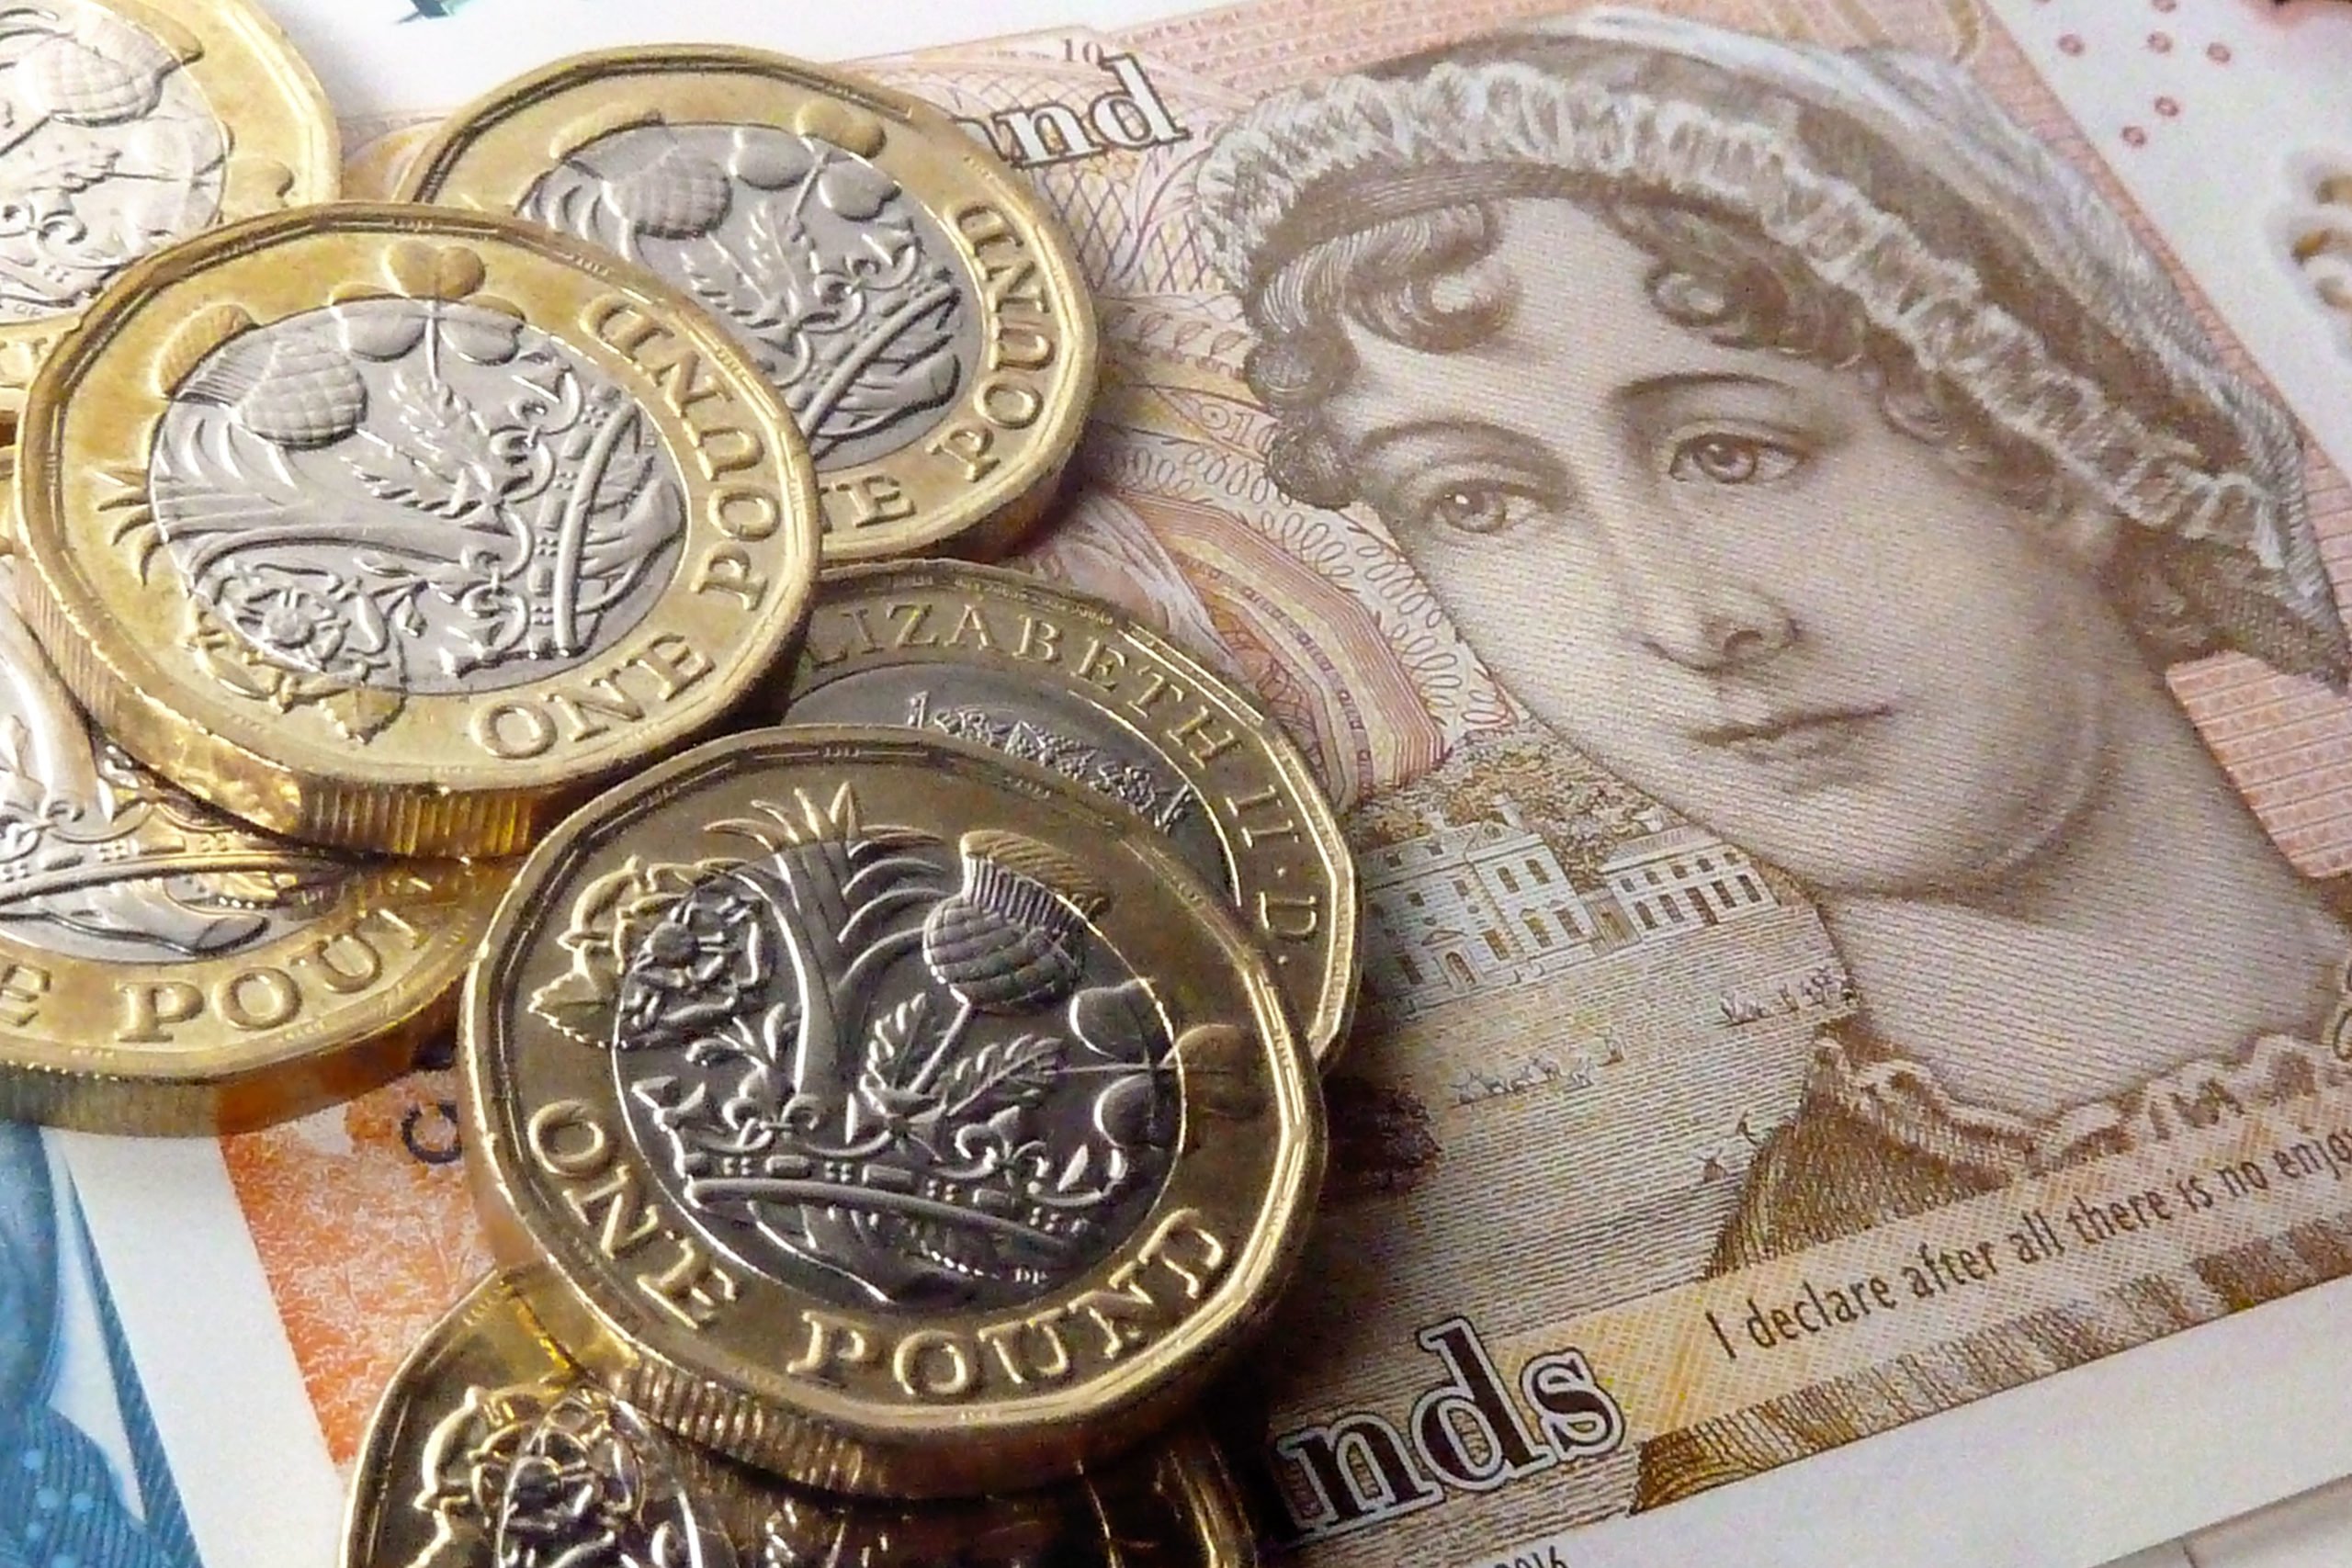 New £10 Note Featuring Jane Austen Is Released Into Circulation